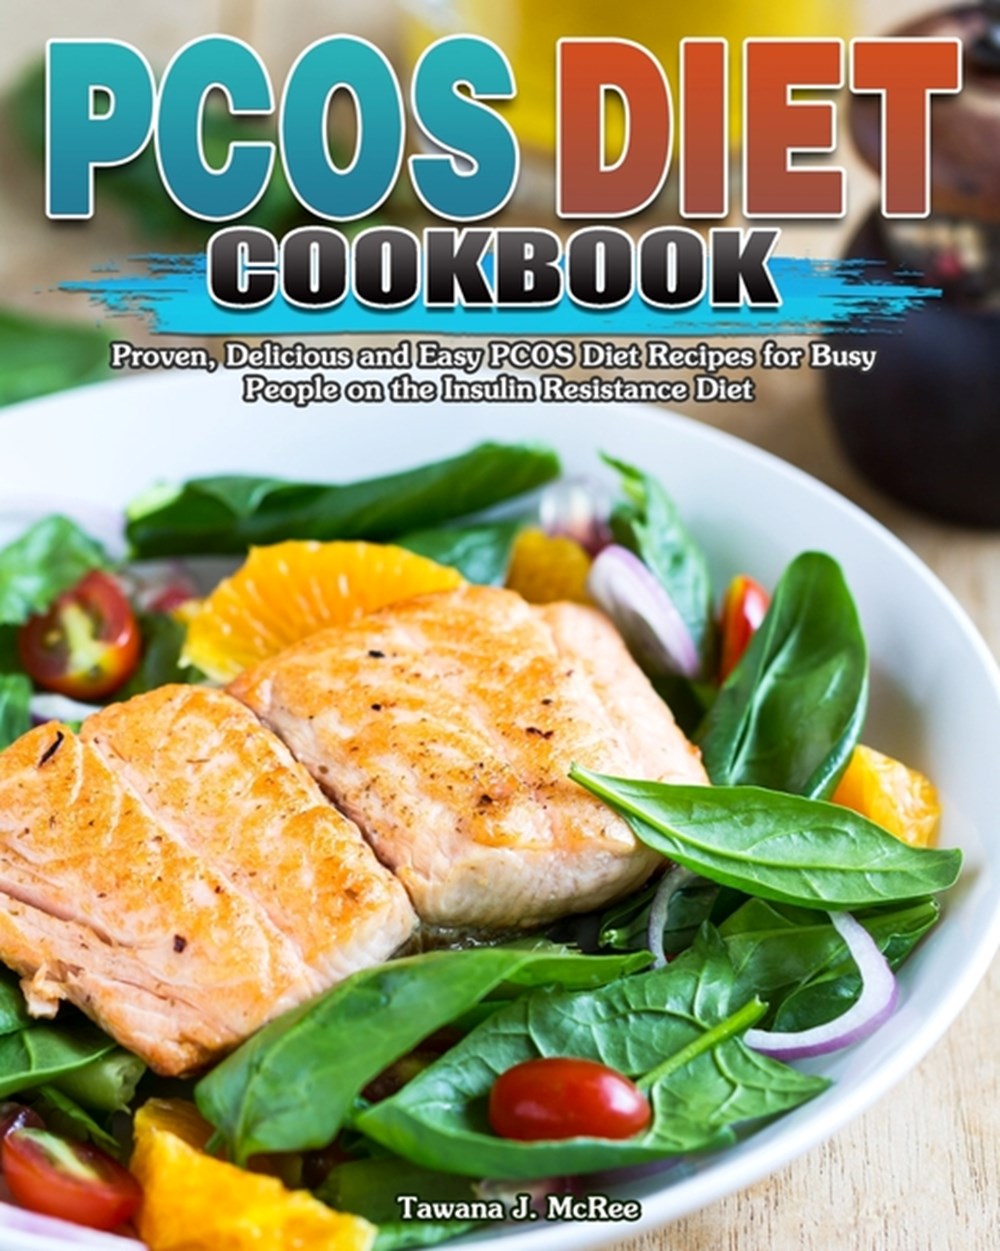 PCOS Diet Cookbook Proven, Delicious and Easy PCOS Diet Recipes for Busy People on the Insulin Resis